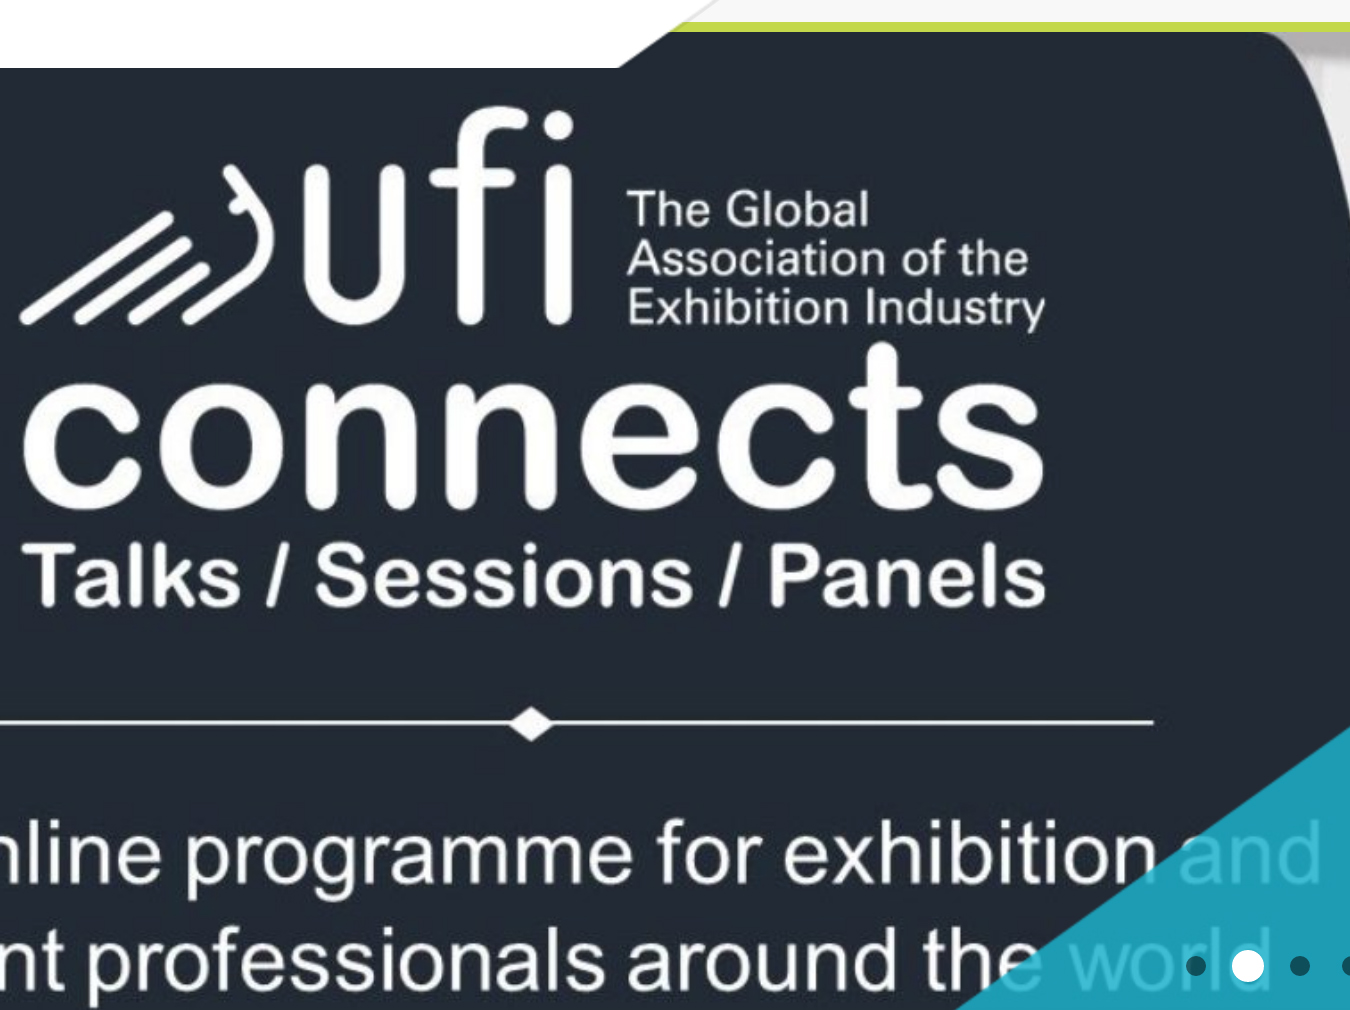 UFI Connects